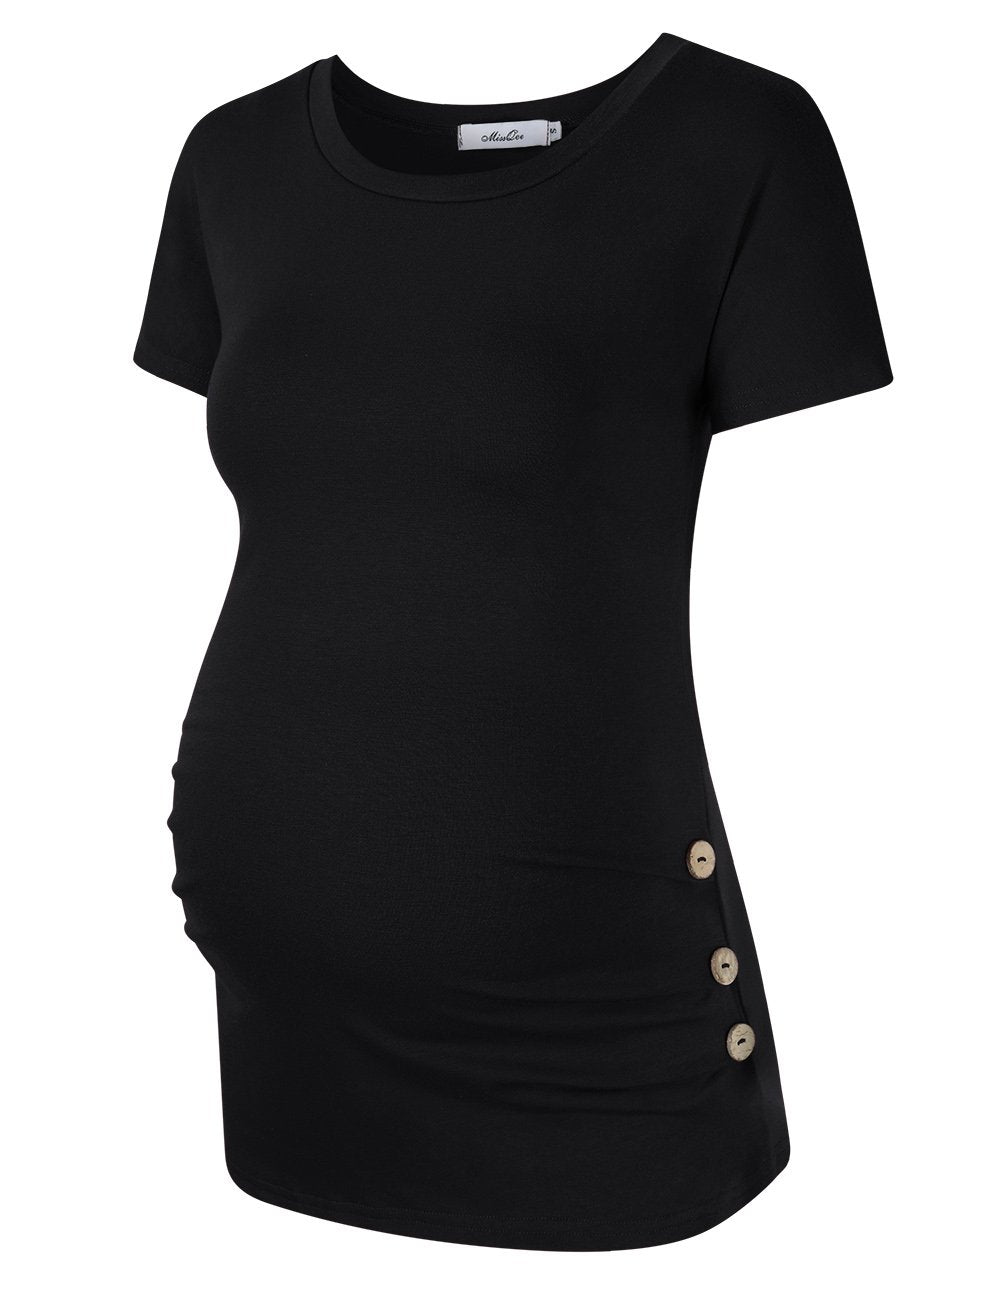 Maternity Shirt Side Button and Ruched Maternity Tunic Tops Maternity Short Sleeve T-Shirts